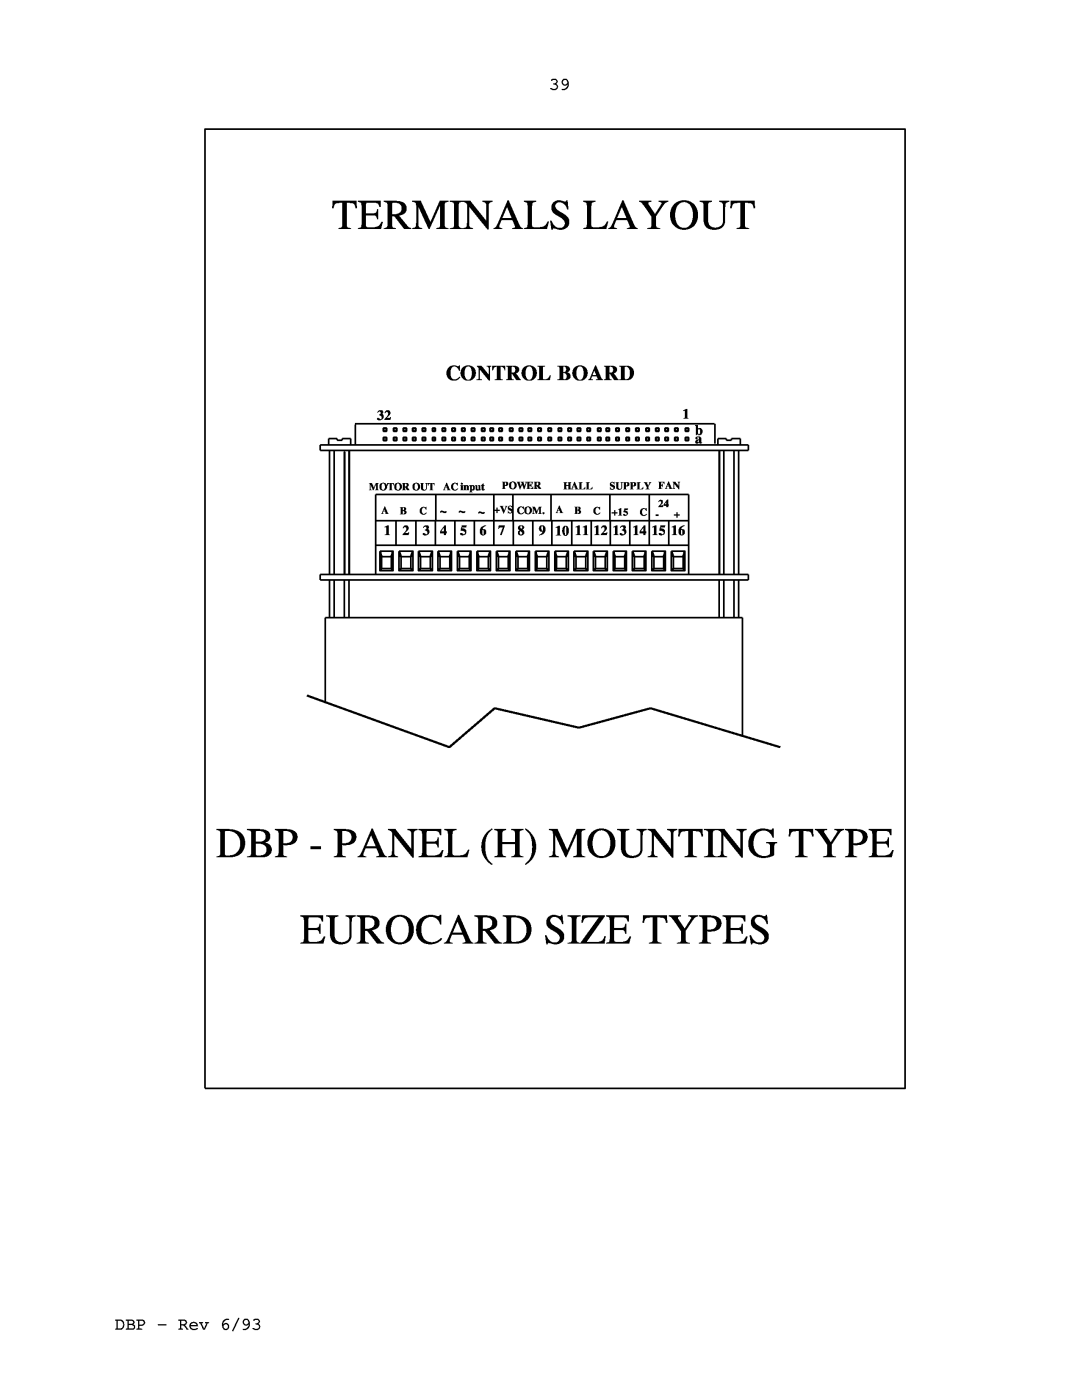 Elmo DBP SERIES manual Control Board, Terminals Layout, Dbp - Panel H Mounting Type Eurocard Size Types 